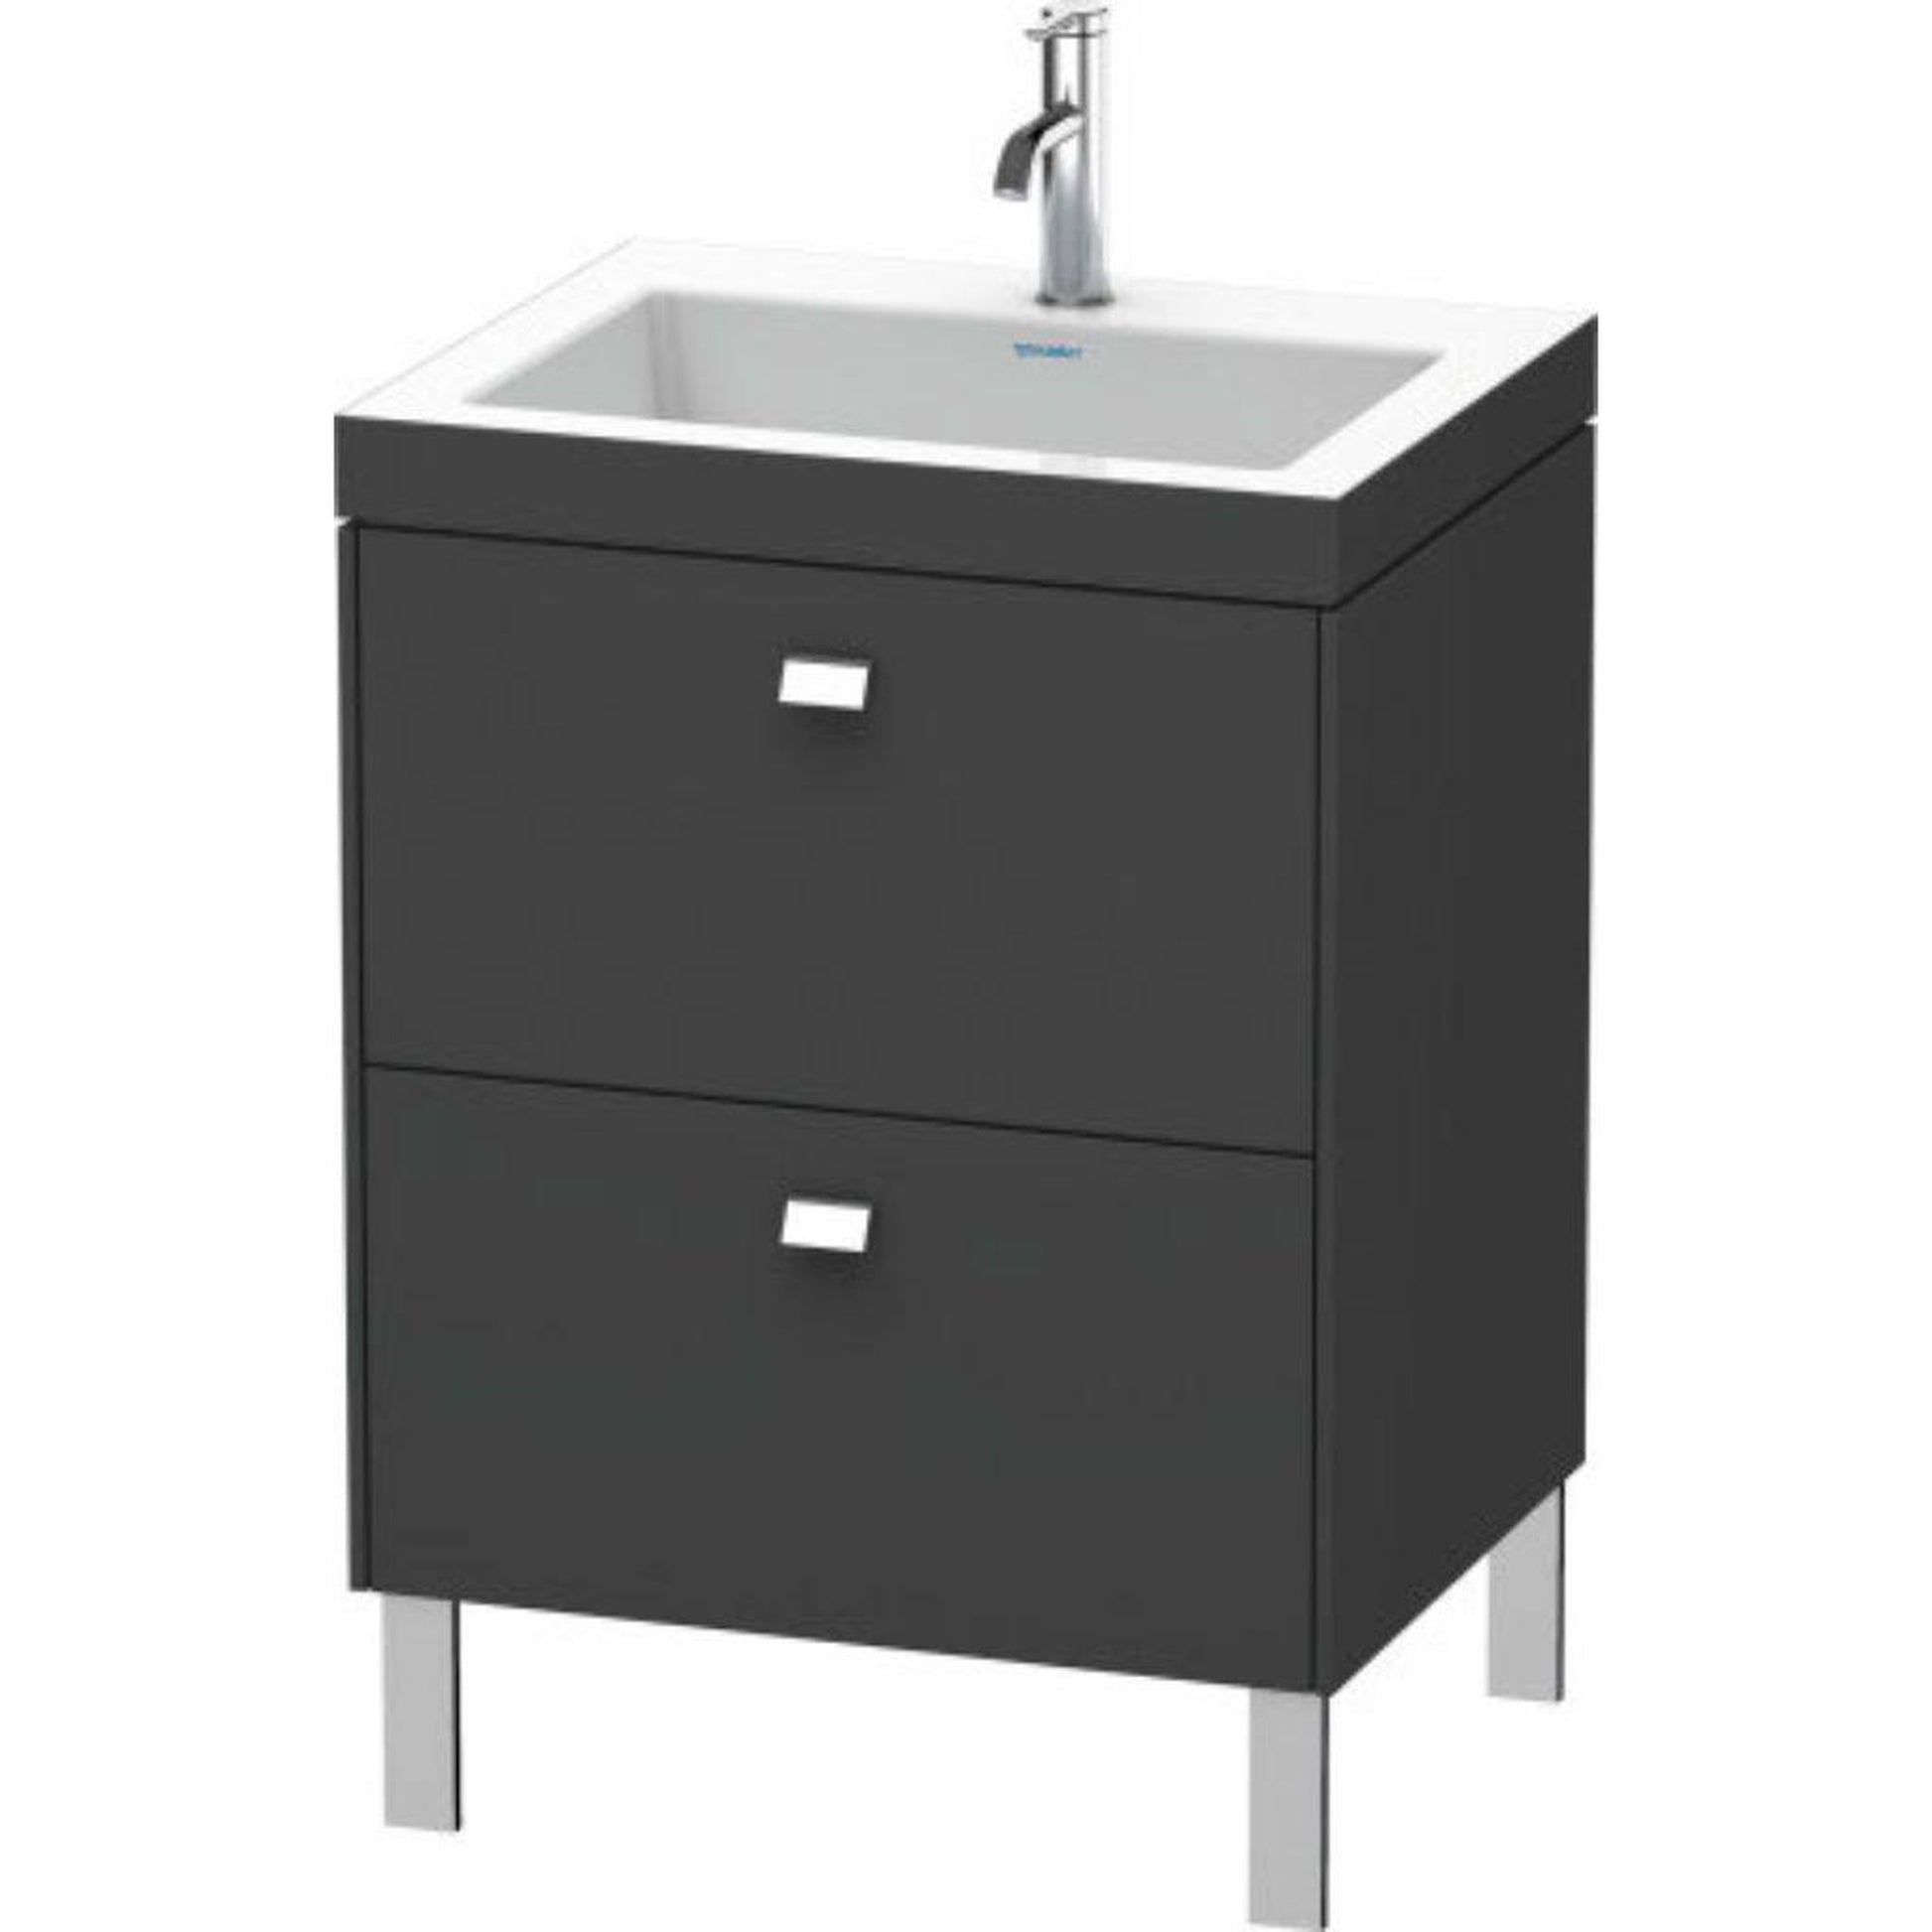 Duravit Brioso 24" x 28" x 19" Two Drawer C-Bonded Floor Standing Vanity Kit With One Tap Hole in Graphite Matt and Chrome Handle